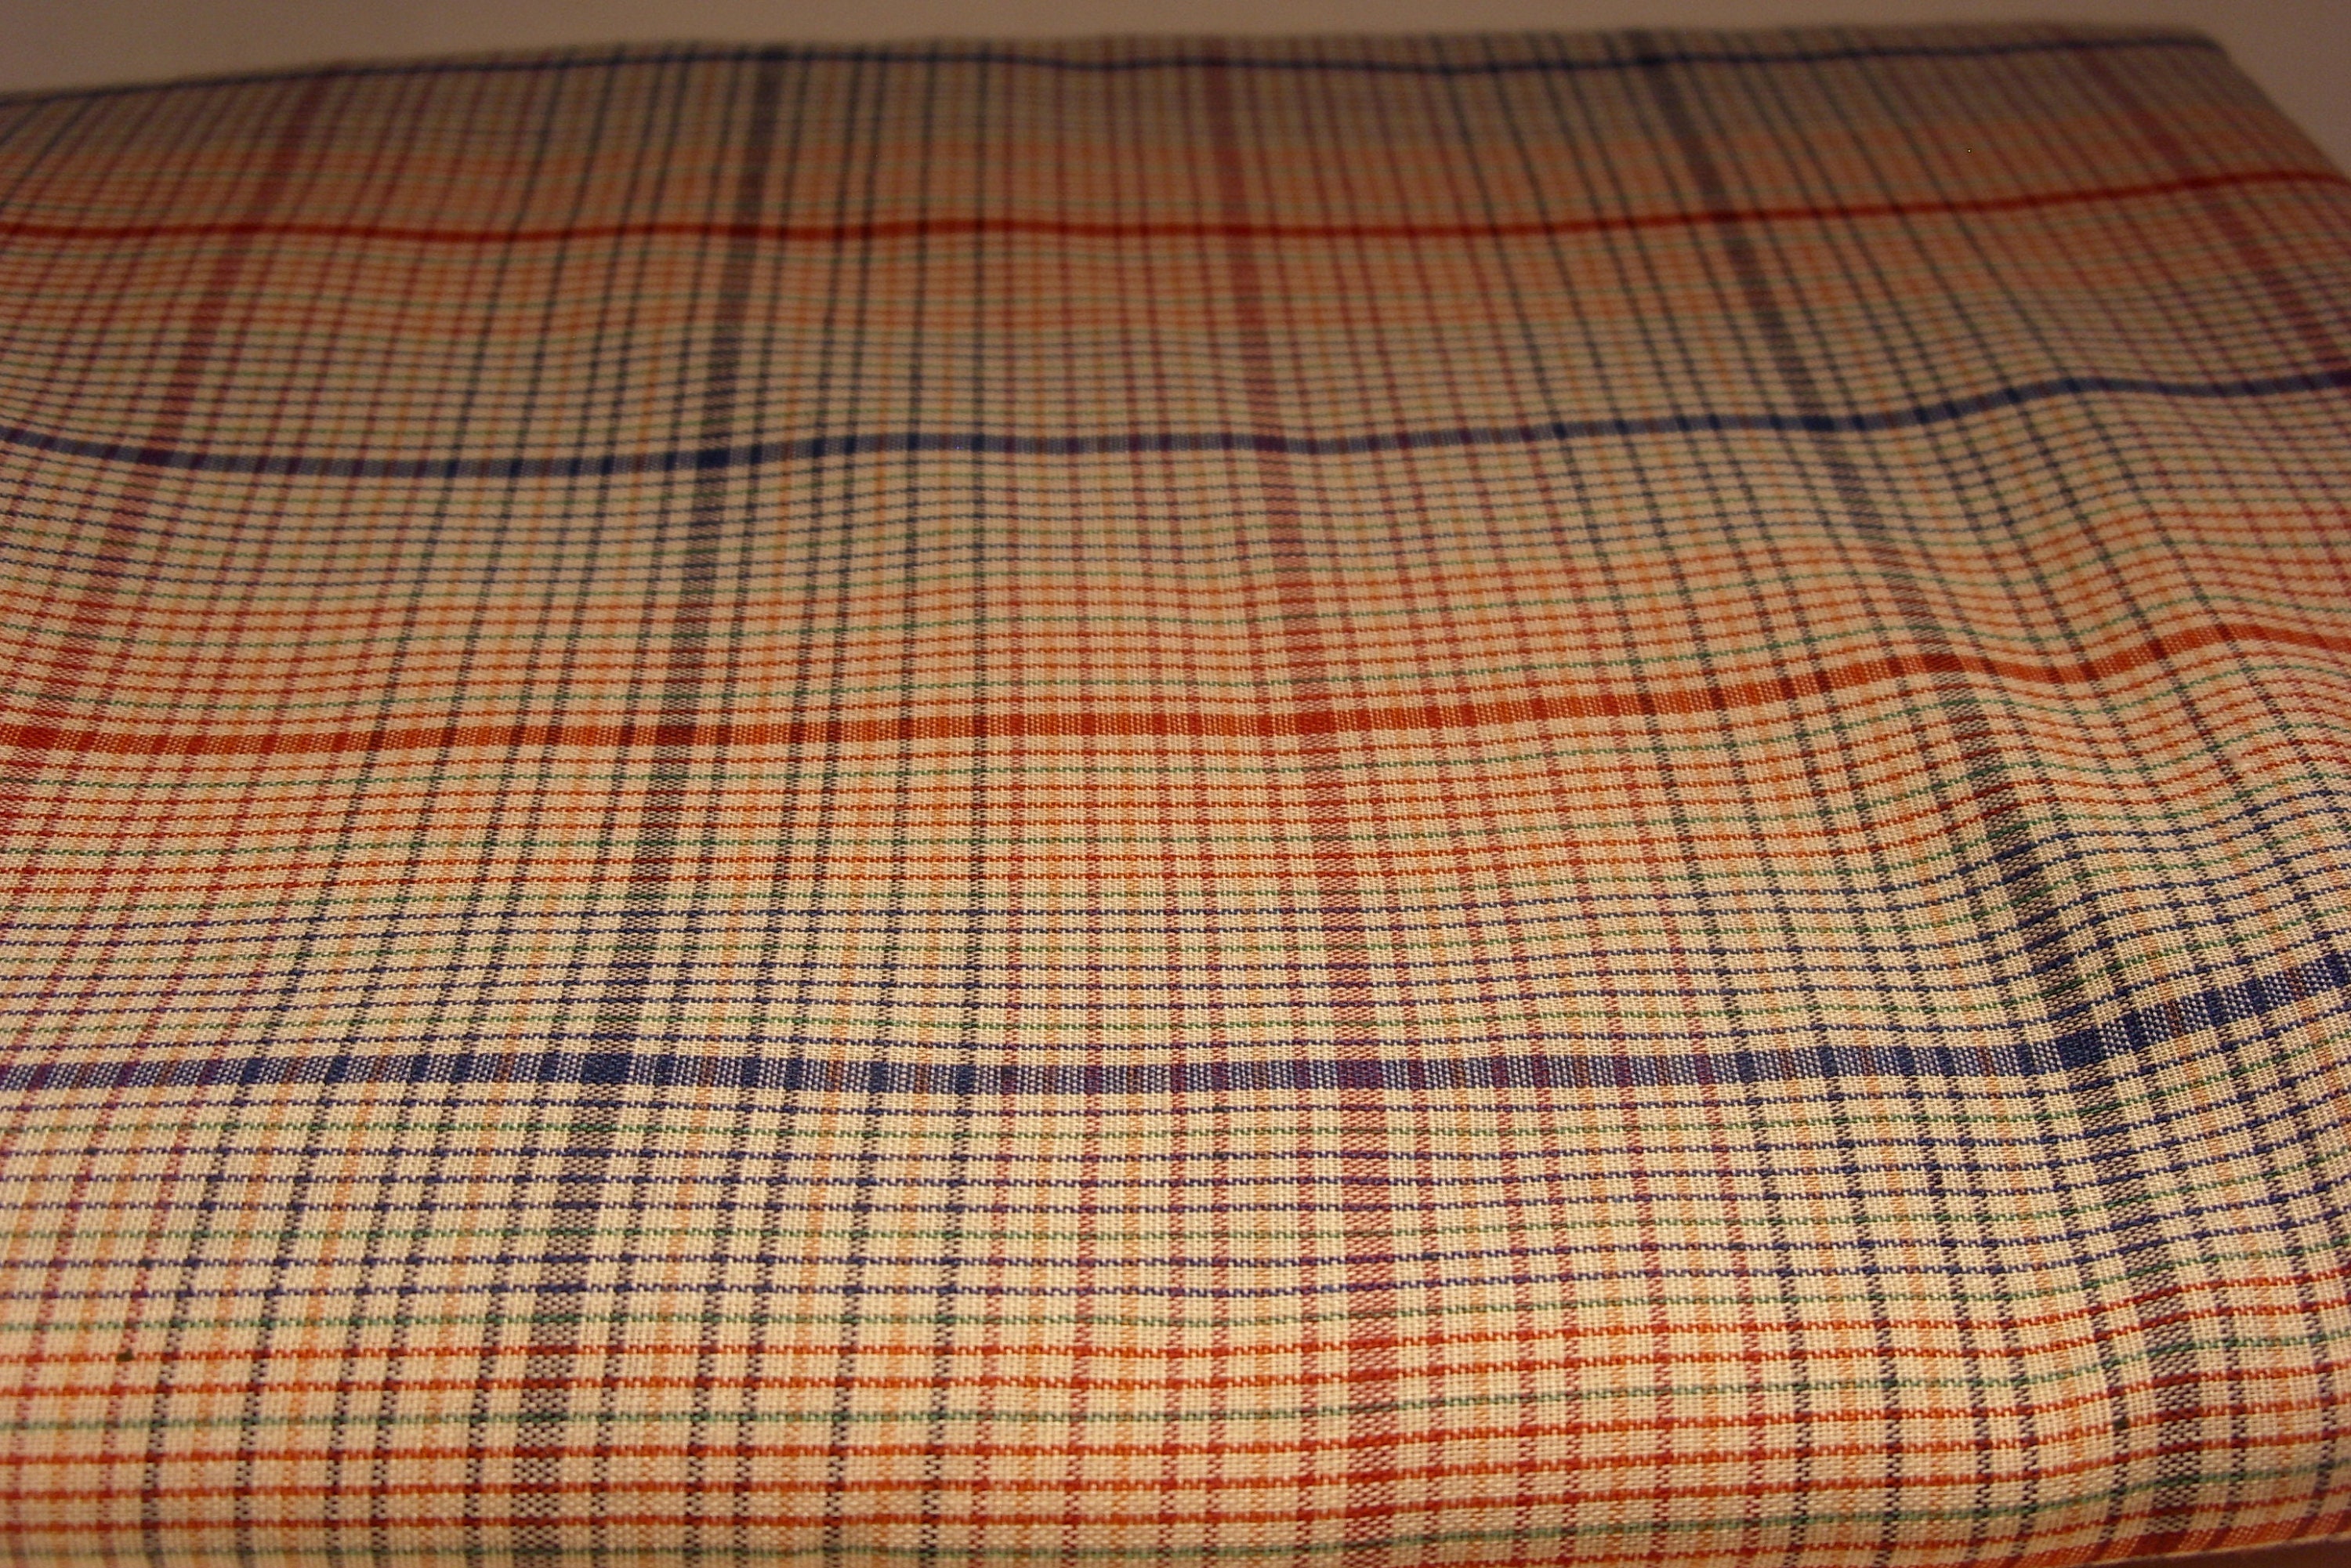 Cotton Blend Red, Blue, Yellow & Green Striped Plaid Fabric, Vintage Fabric Is 78 Inches Long 46 Wide